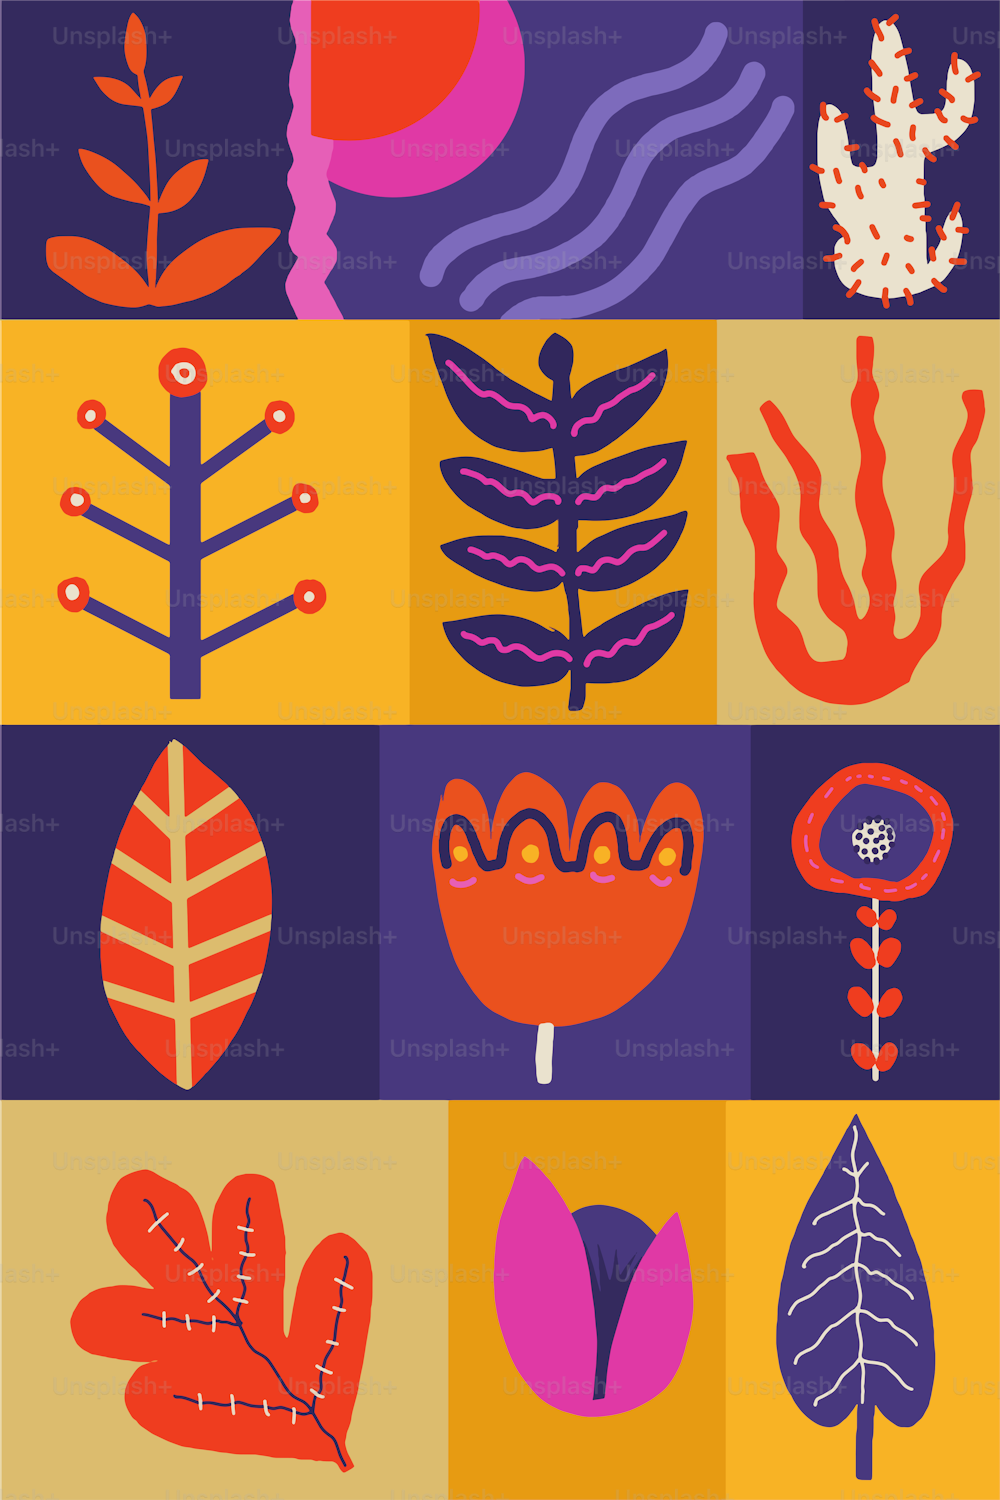 Cutely designed leaves and plants in lively colors